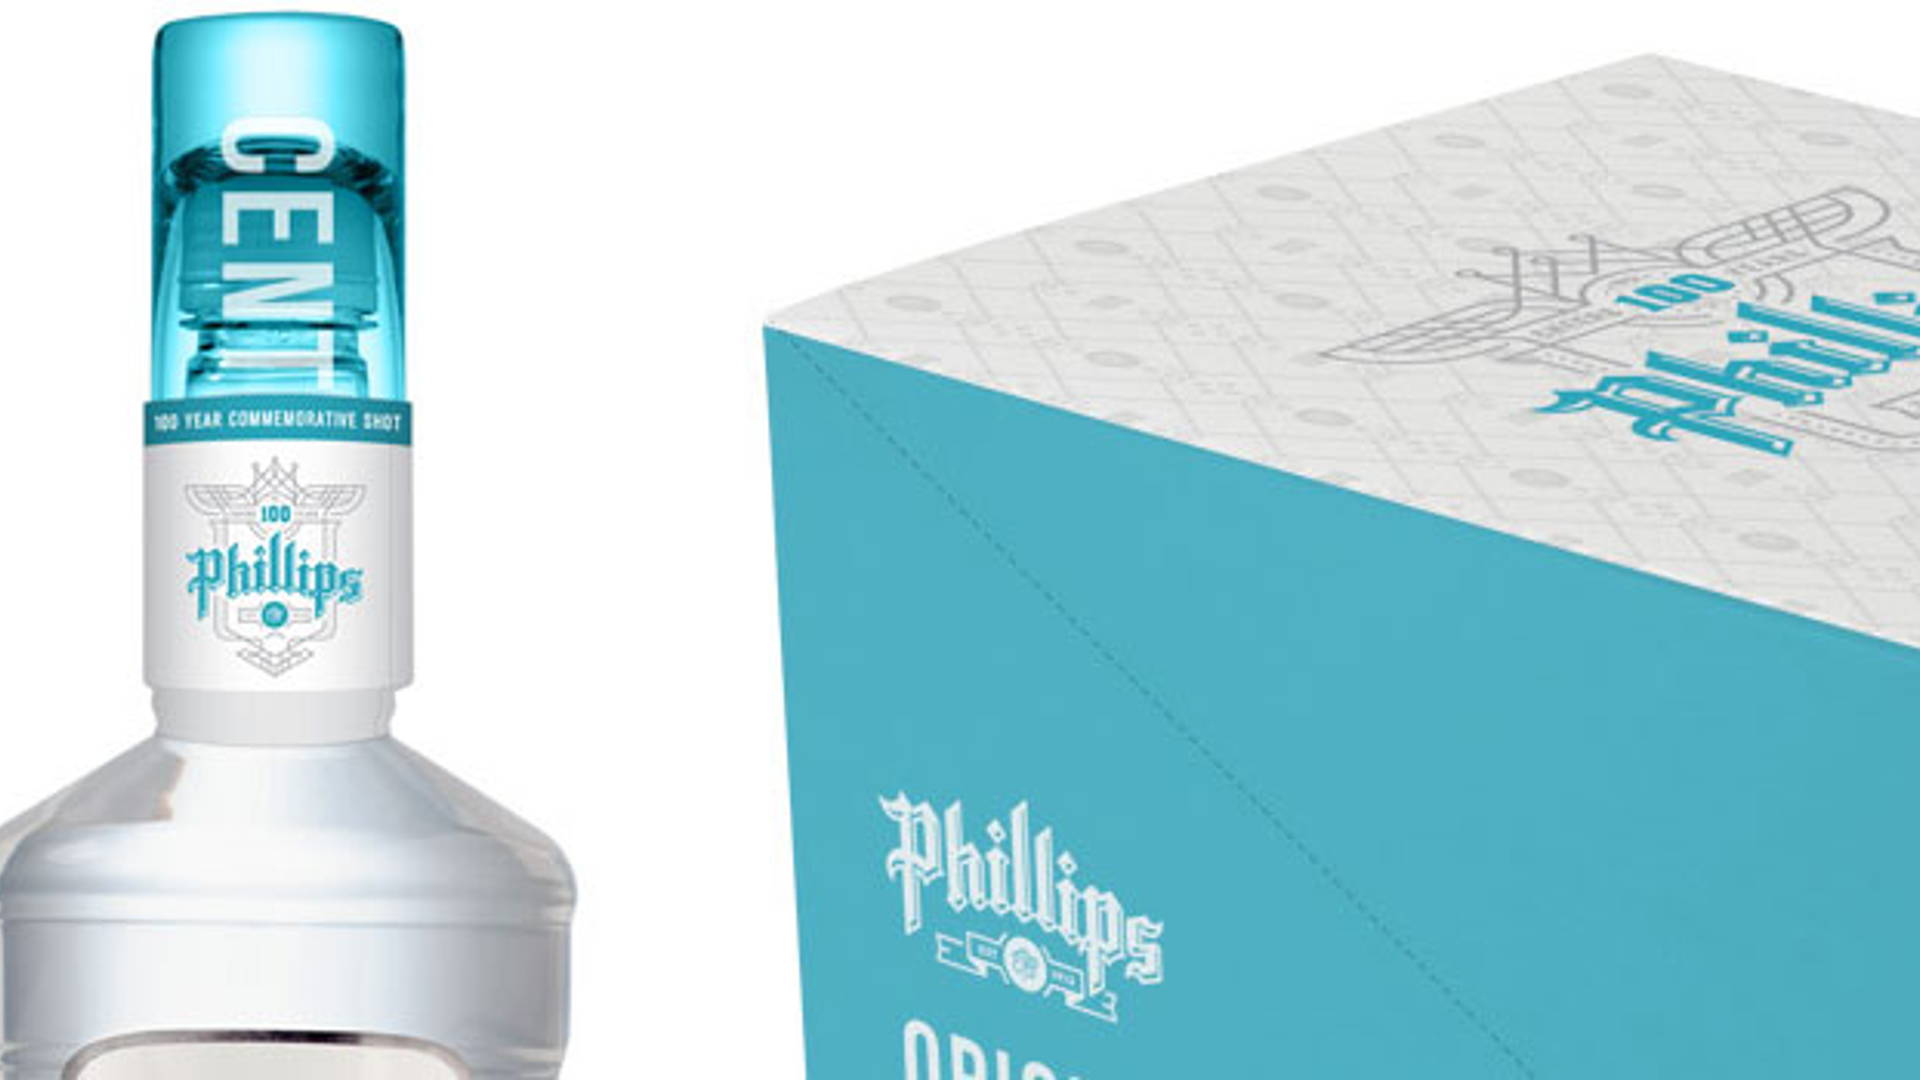 Featured image for Phillips Distilling Company: 100-Year Anniversary Campaign